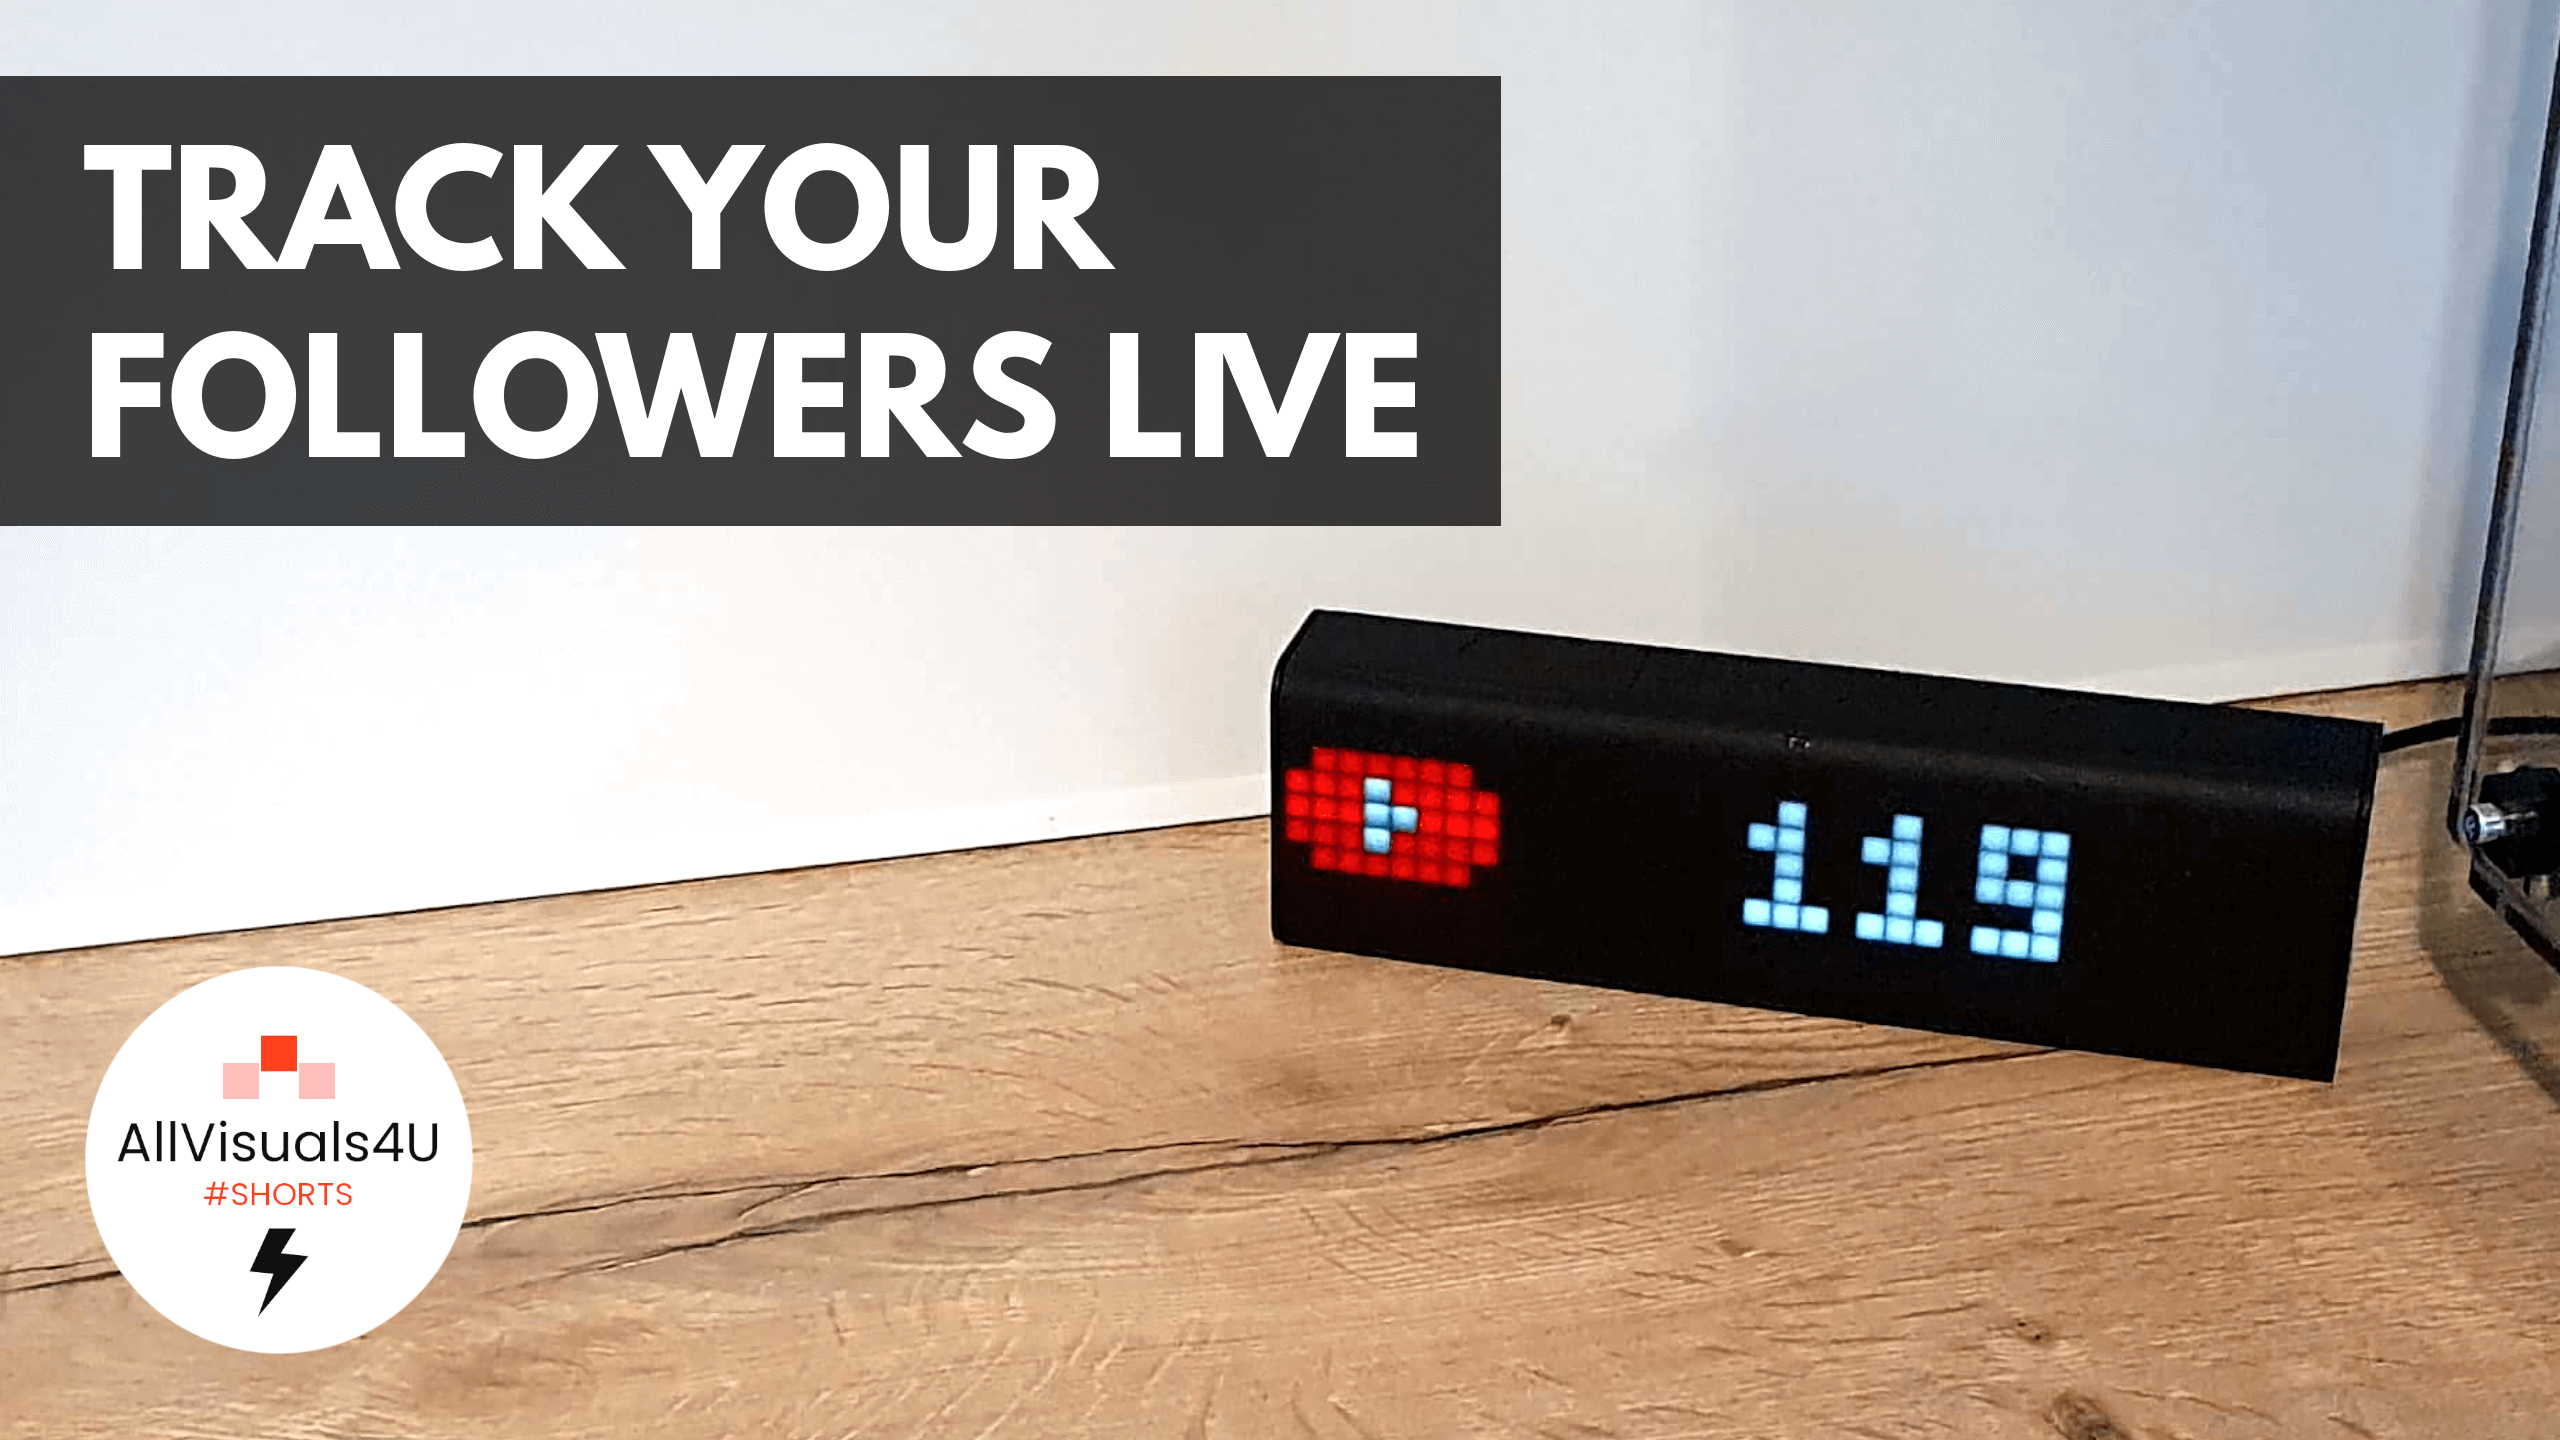 https://3dpartsforyou.com/wp-content/uploads/2021/08/LaMetric-TIME-Smart-LED-Pixel-Clock-Track-Your-Followers-Live-Shorts.png